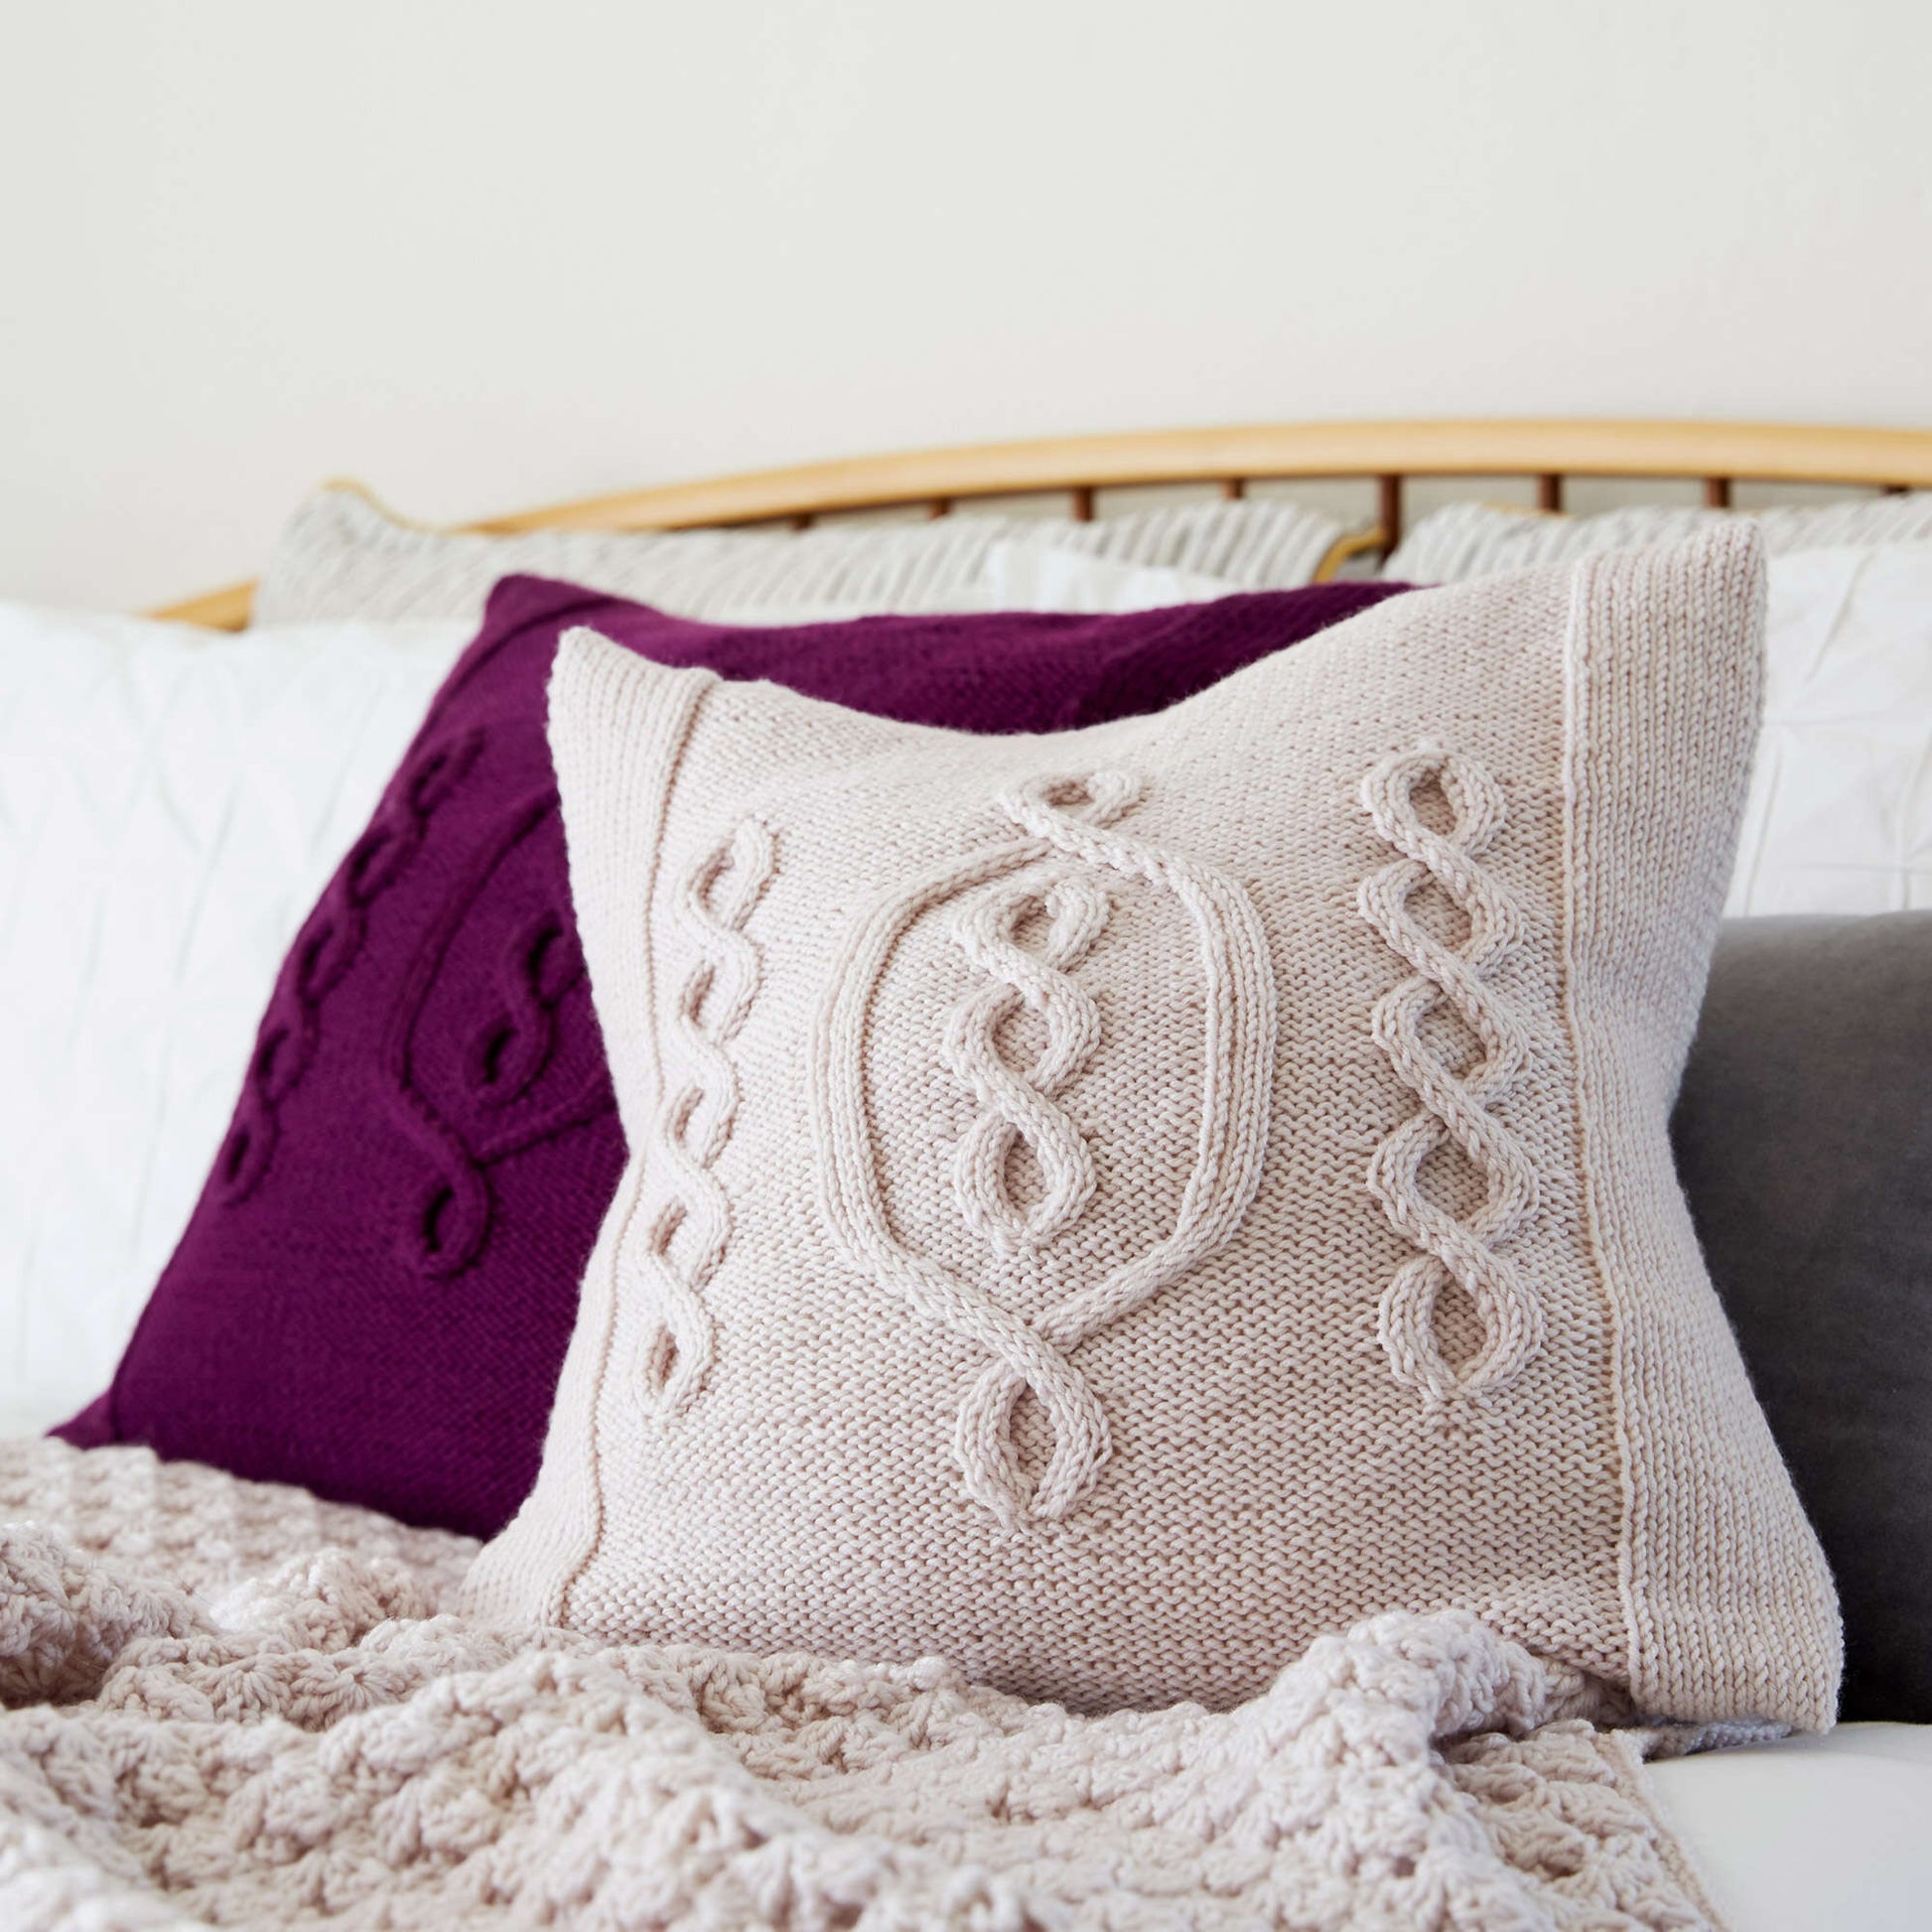 Free Red Heart Crochet Hygge Chic Throw Pattern